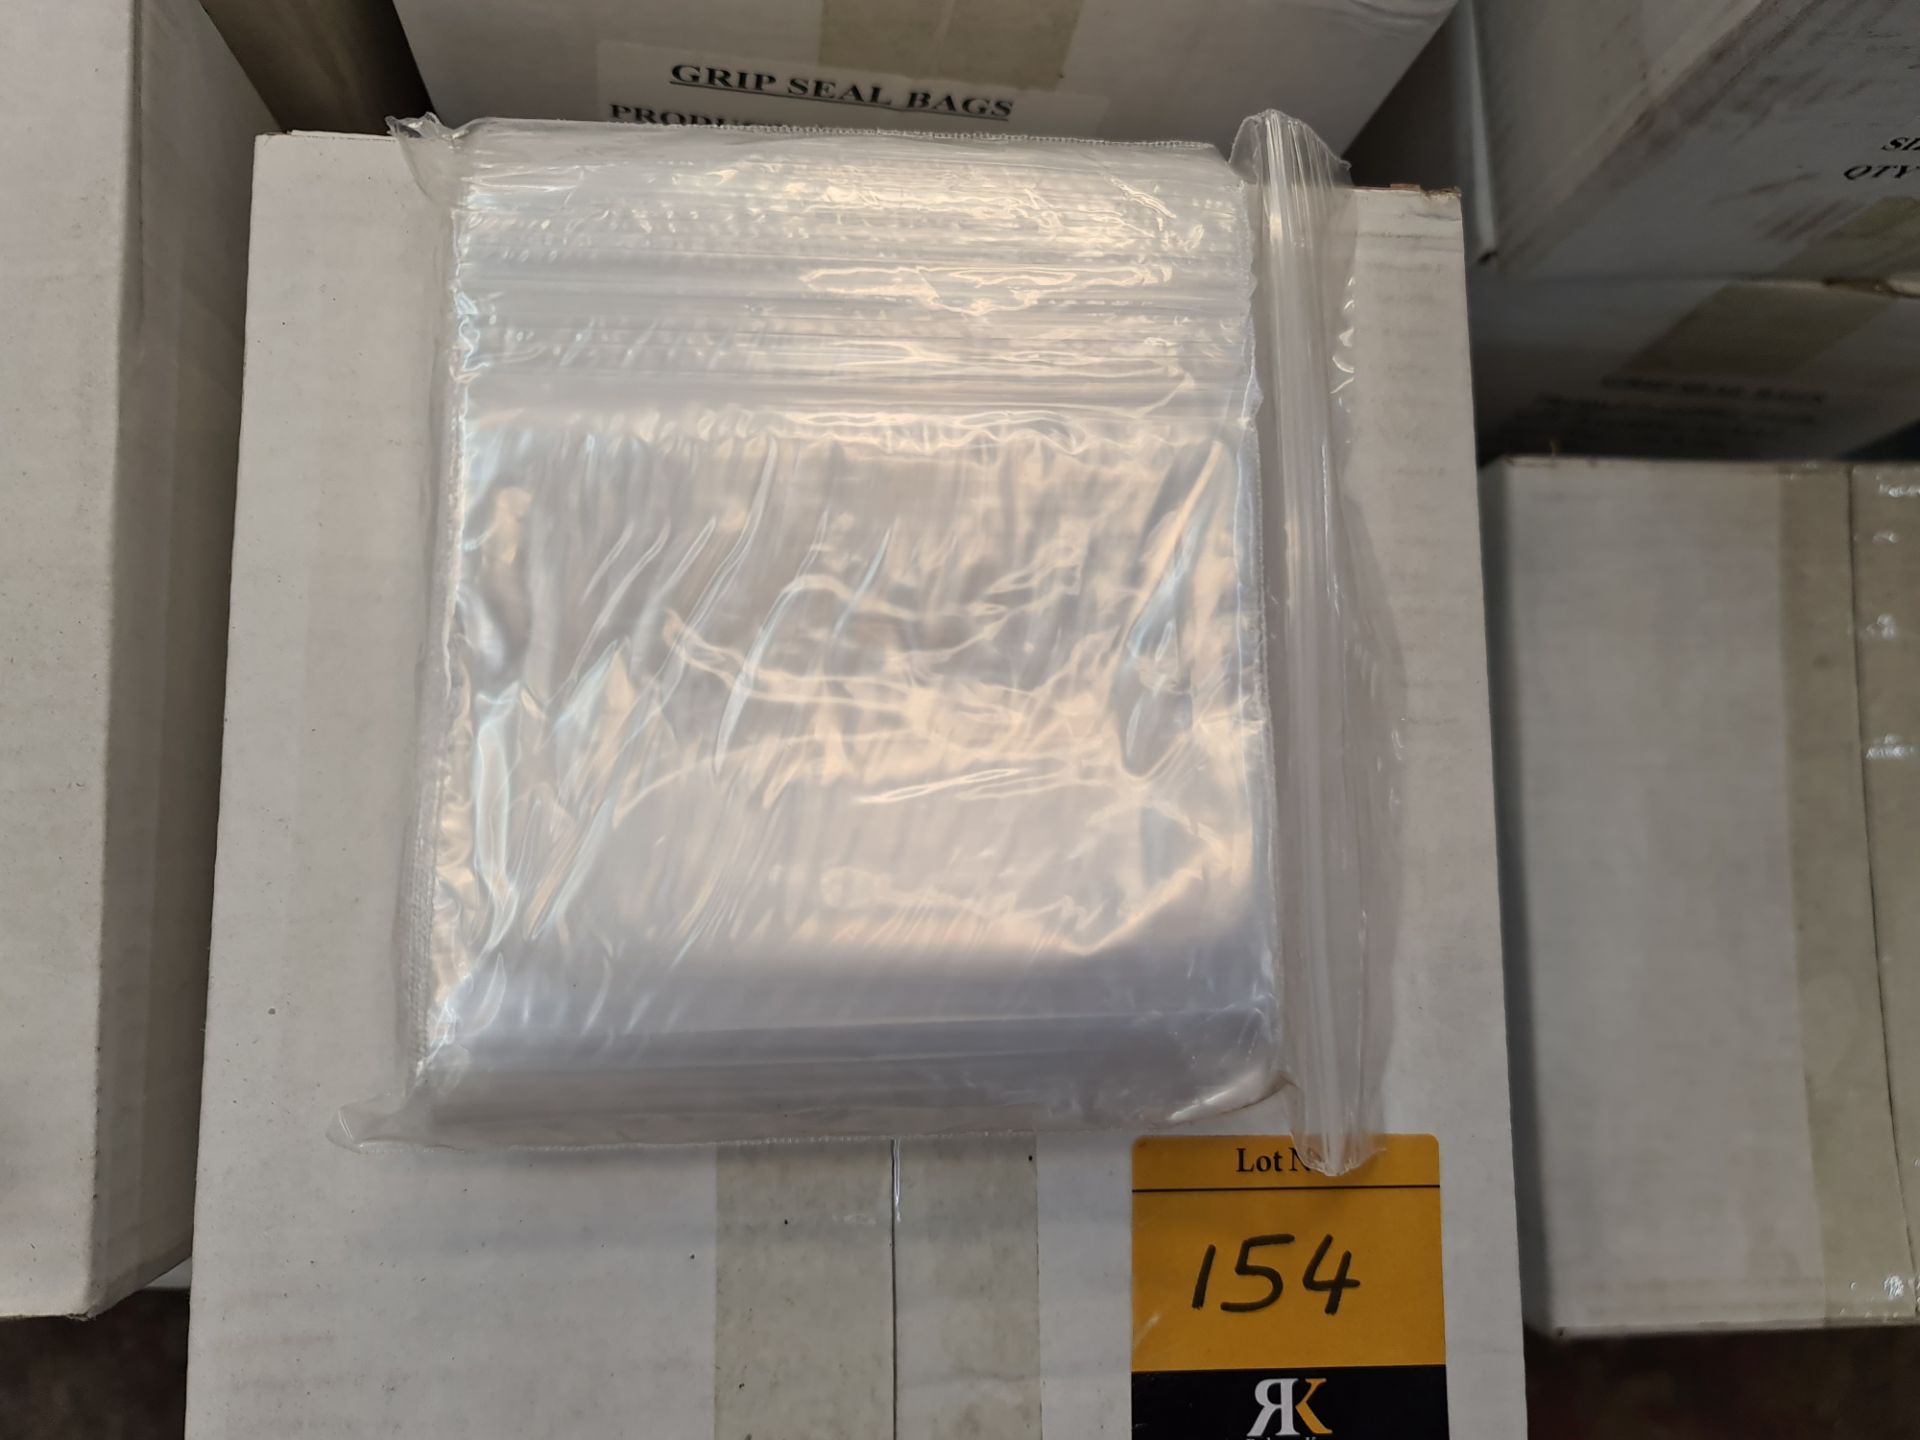 9 boxes of Grip Seal bags - each box contains 1,000 114 x 114mm bags - Image 4 of 4